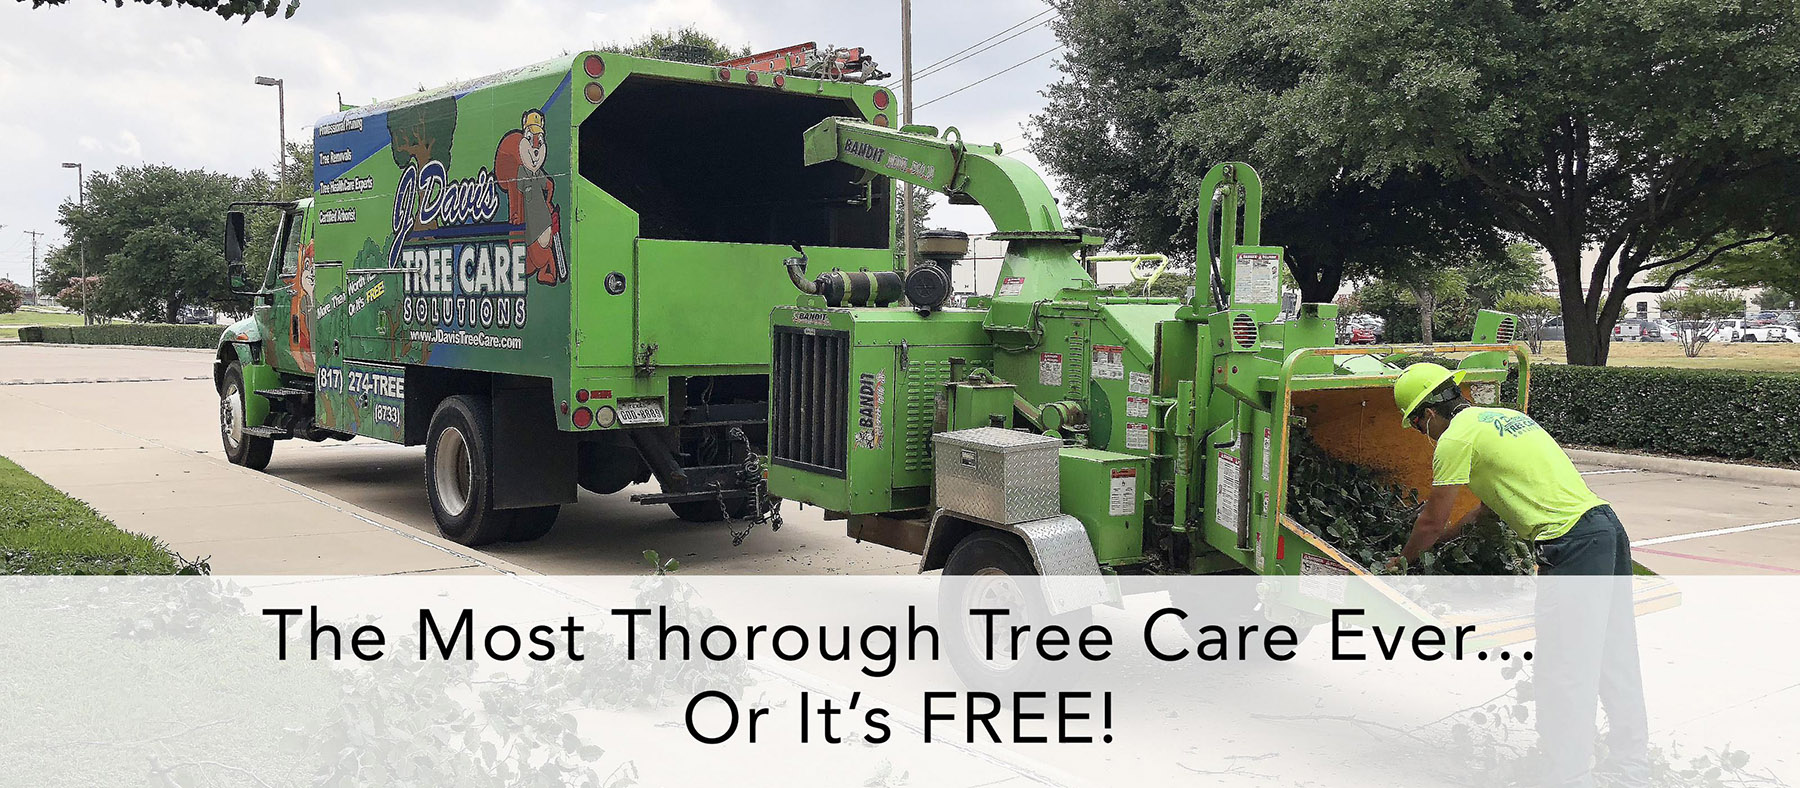 Richland Hills Tree Removal. Why Tree Removal Is Easier Now